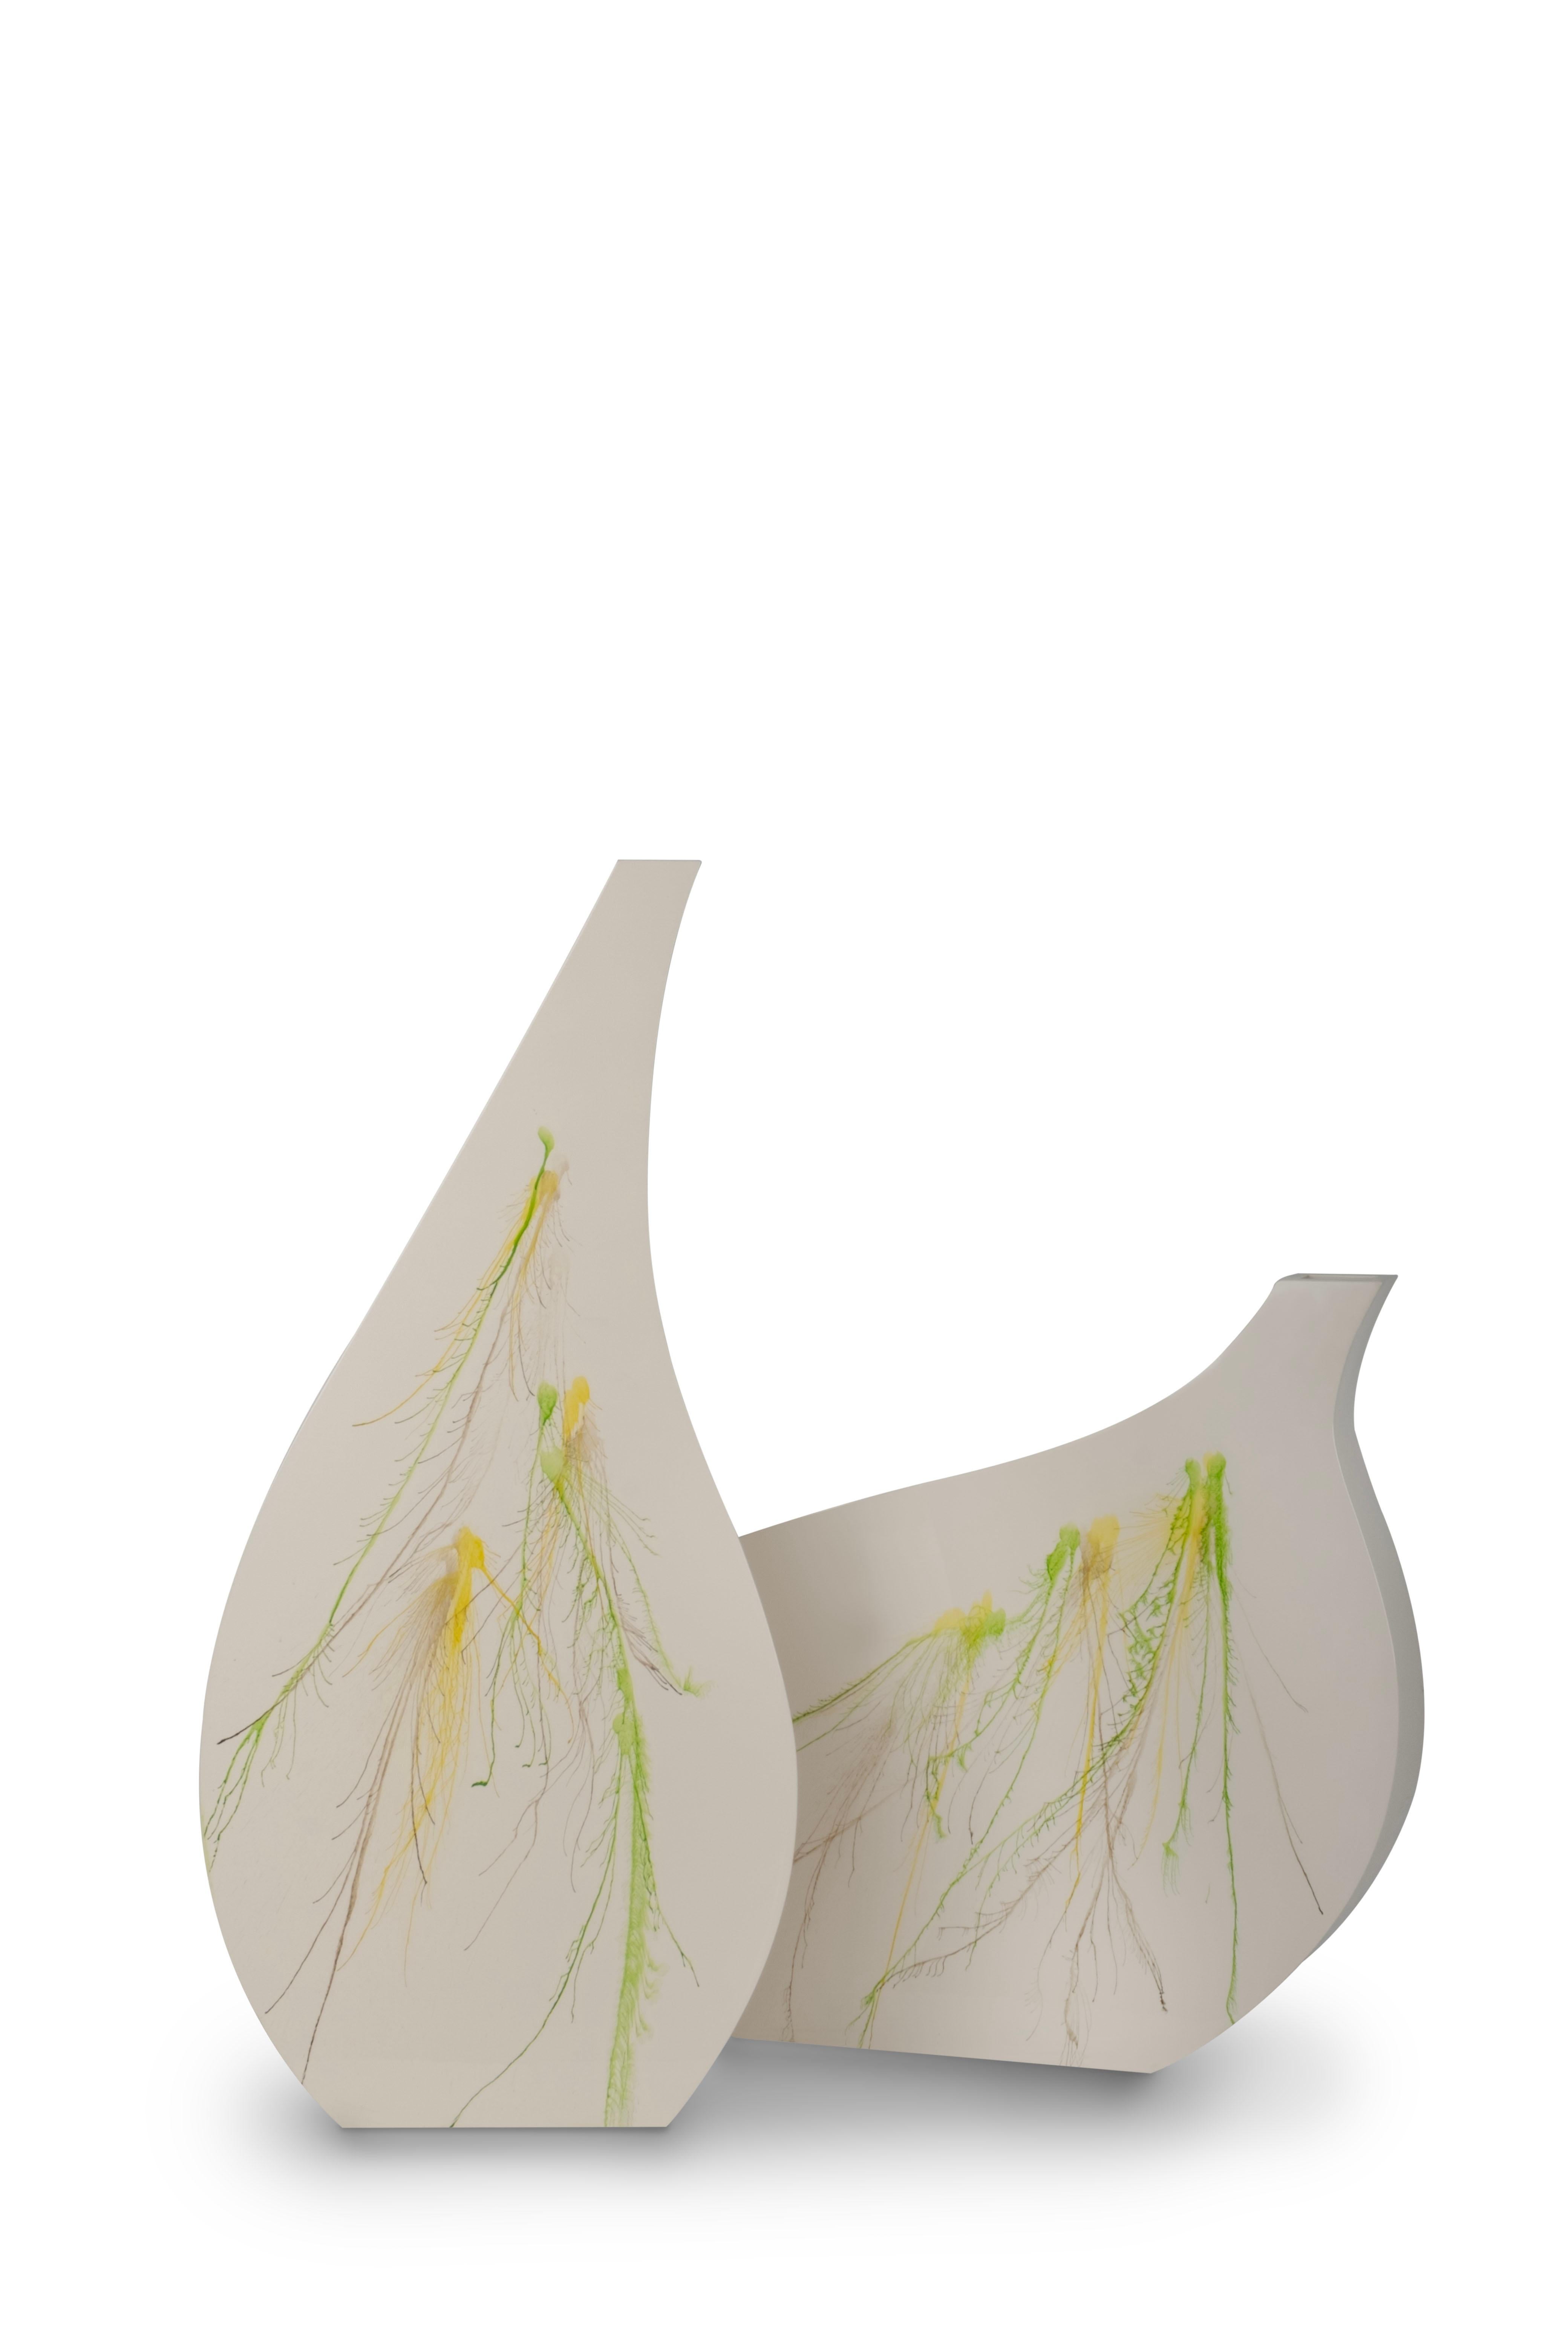 Set of 2 Wooden Decorative Vases Cream, Lusitanus Home Collection, Handcrafted in Portugal - Europe by Lusitanus Home.

This beautiful set of 2 Decorative vases is lacquered in high-gloss cream with handpainted designs.

Not Waterproof.

Handcrafted